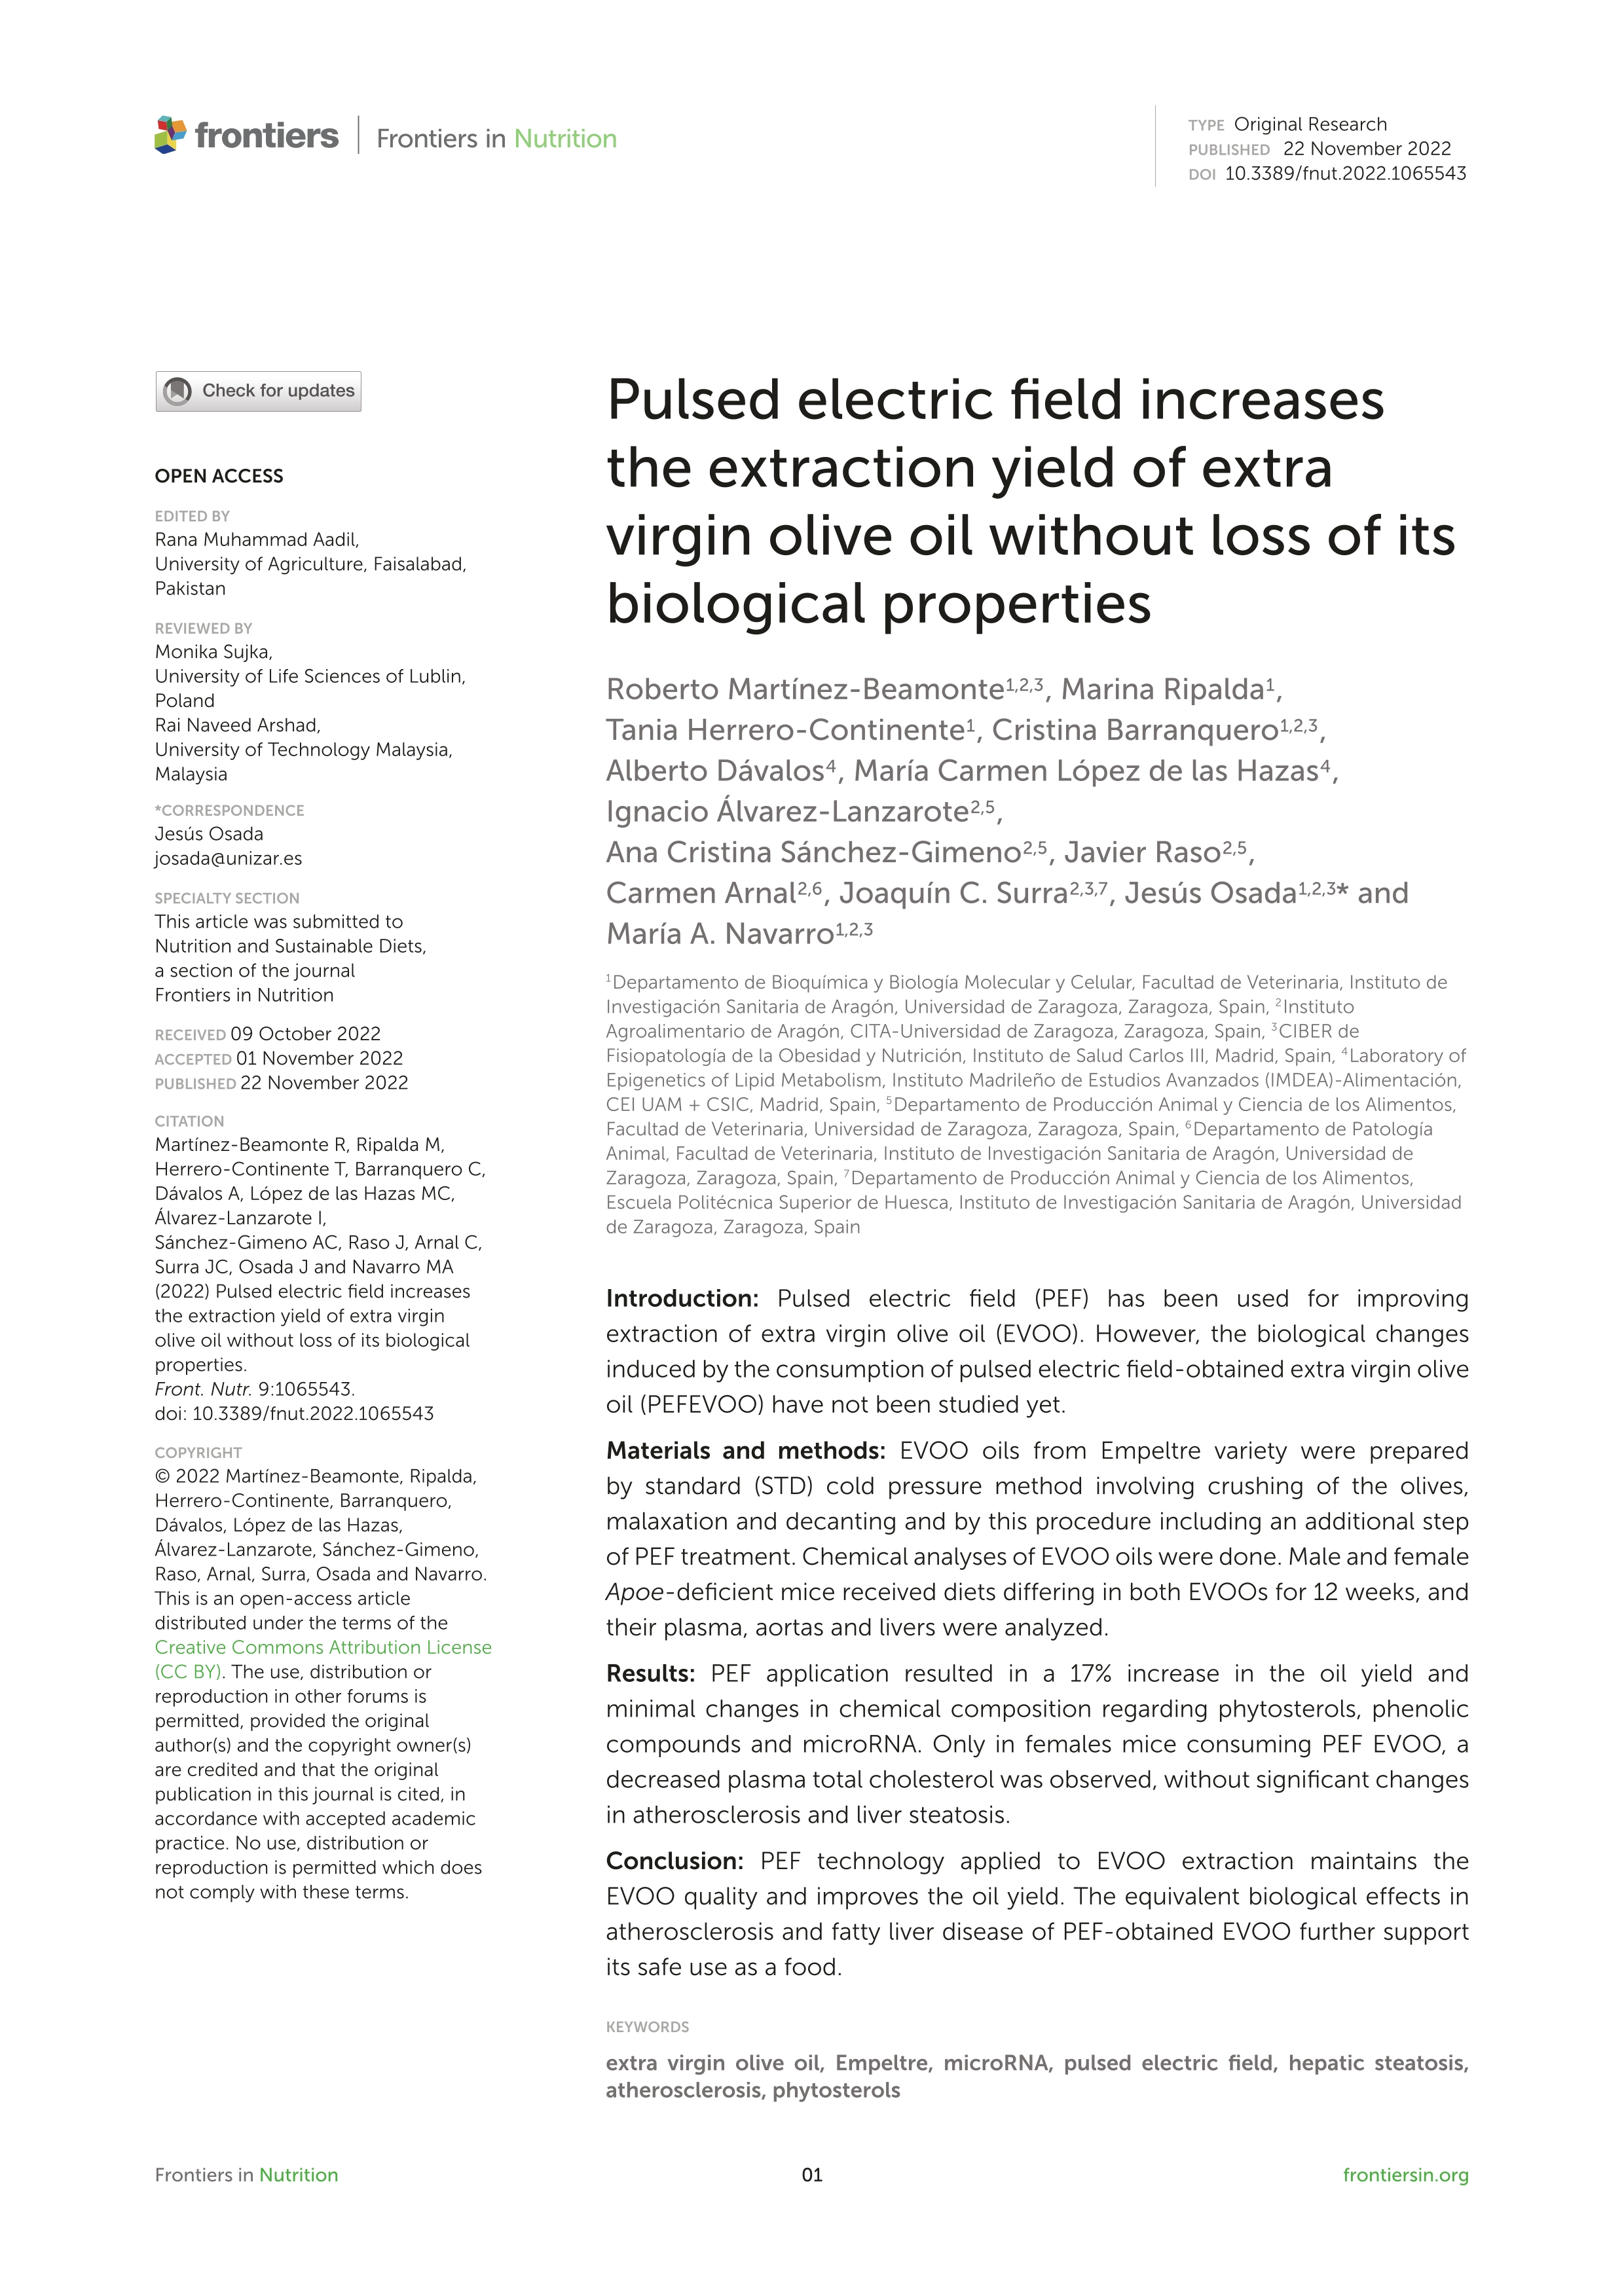 Pulsed electric field increases the extraction yield of extra virgin olive oil without loss of its biological properties